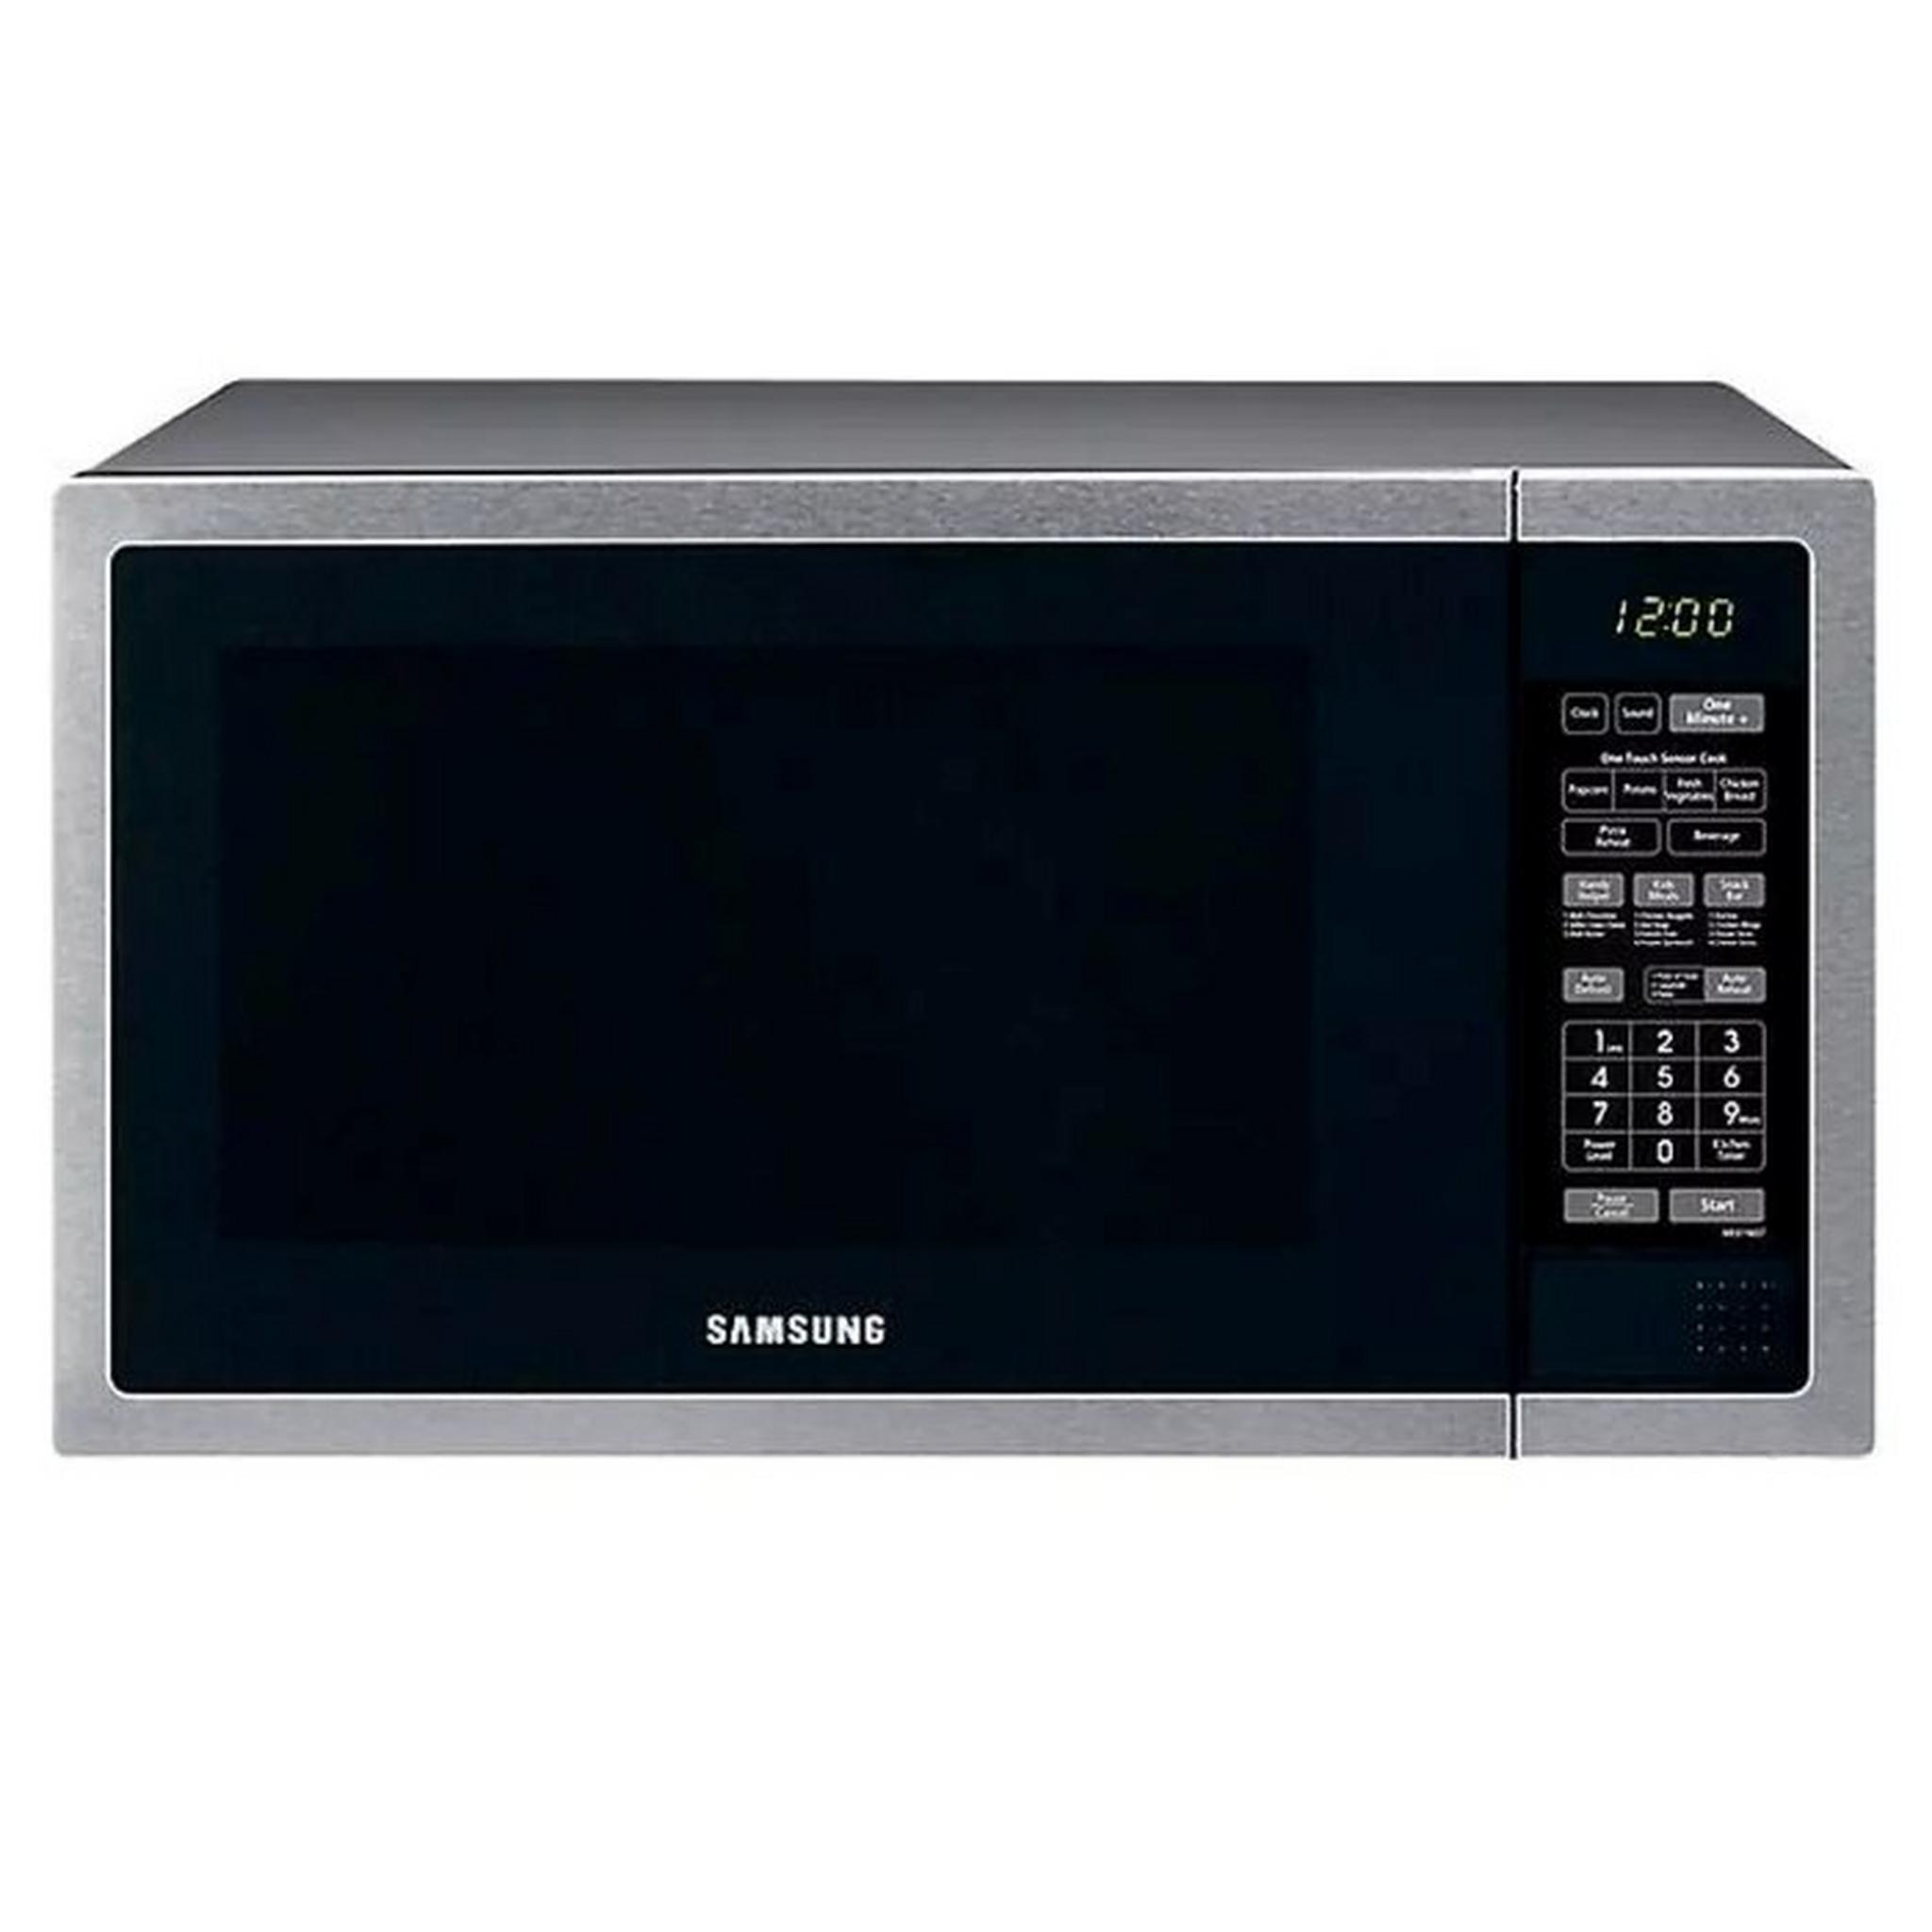 Samsung 55L Microwave Oven 1000W (ME6194ST)